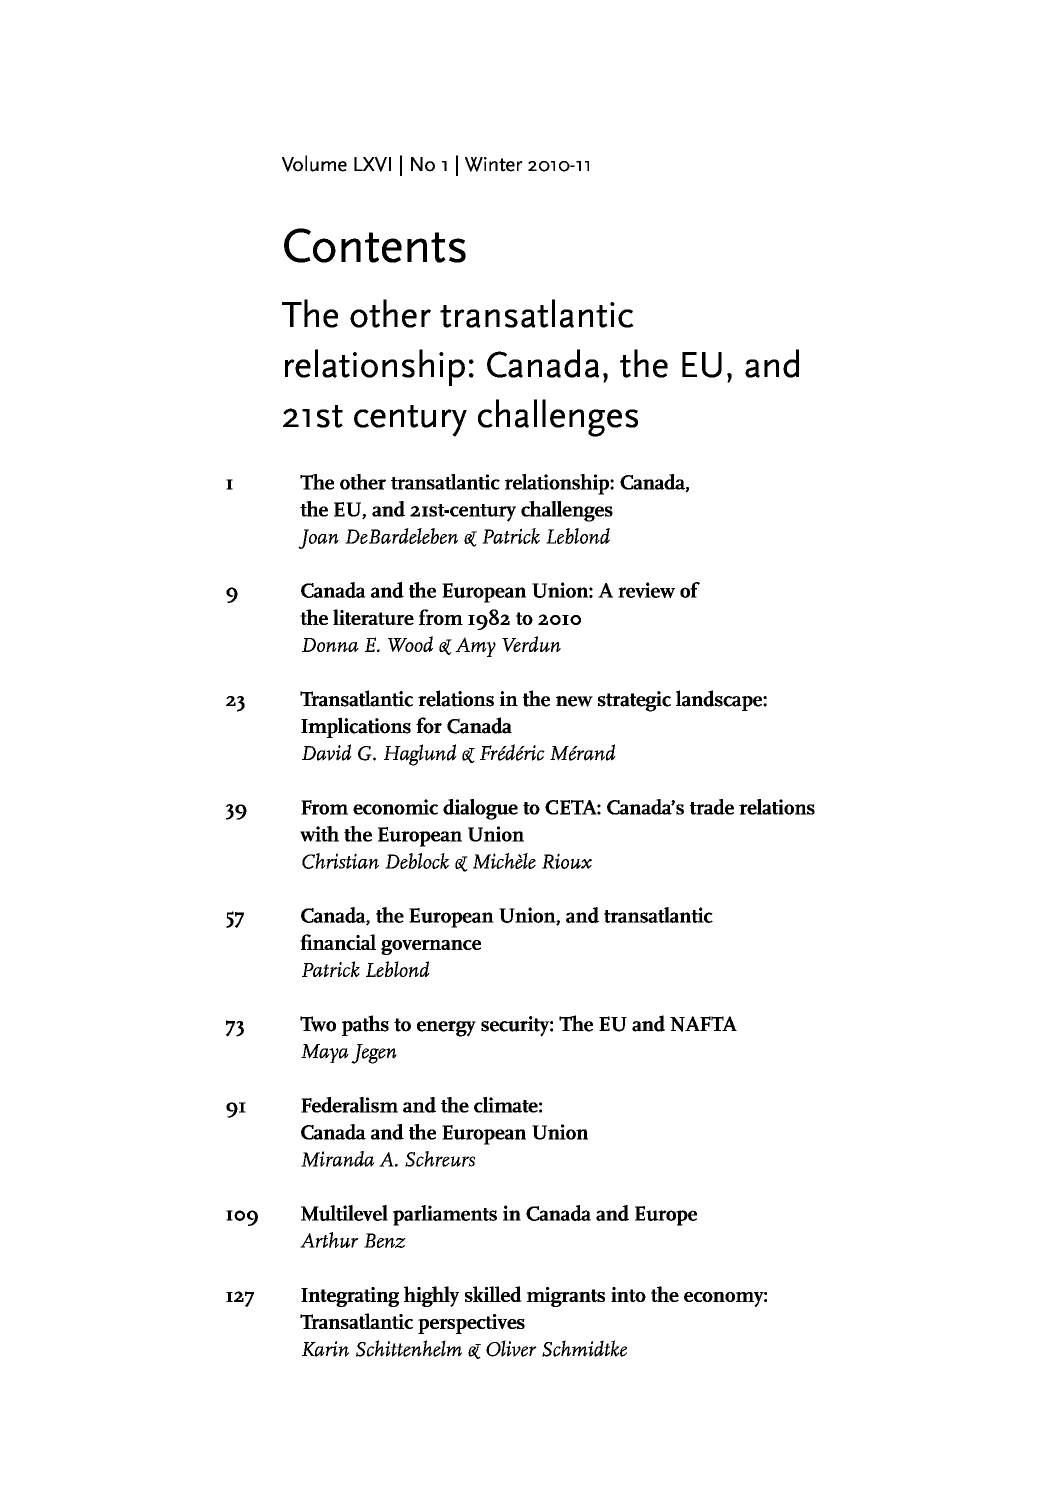 handle is hein.journals/intj66 and id is 1 raw text is: Volume LXVI |INo iI Winter 2010-11

Contents
The other transatlantic
relationship: Canada, the EU, and
21st century challenges
I       The other transatlantic relationship: Canada,
the EU, and 21st-century challenges
Joan DeBardeleben ck Patrick Leblond
9       Canada and the European Union: A review of
the literature from 1982 to 2010
Donna E. Wood k Amy Verdun
23      Transatlantic relations in the new strategic landscape:
Implications for Canada
David G. Haglund Li Fr6deric Merand
39      From economic dialogue to CETA: Canada's trade relations
with the European Union
Christian Deblock ek Michelle Rioux
57      Canada, the European Union, and transatlantic
financial governance
Patrick Leblond
73      Two paths to energy security: The EU and NAFTA
Maya jegen
91      Federalism and the climate:
Canada and the European Union
Miranda A. Schreurs
109     Multilevel parliaments in Canada and Europe
Arthur Benz
127     Integrating highly skilled migrants into the economy:
Transatlantic perspectives
Karin Schittenheim e( Oliver Schmidtke


